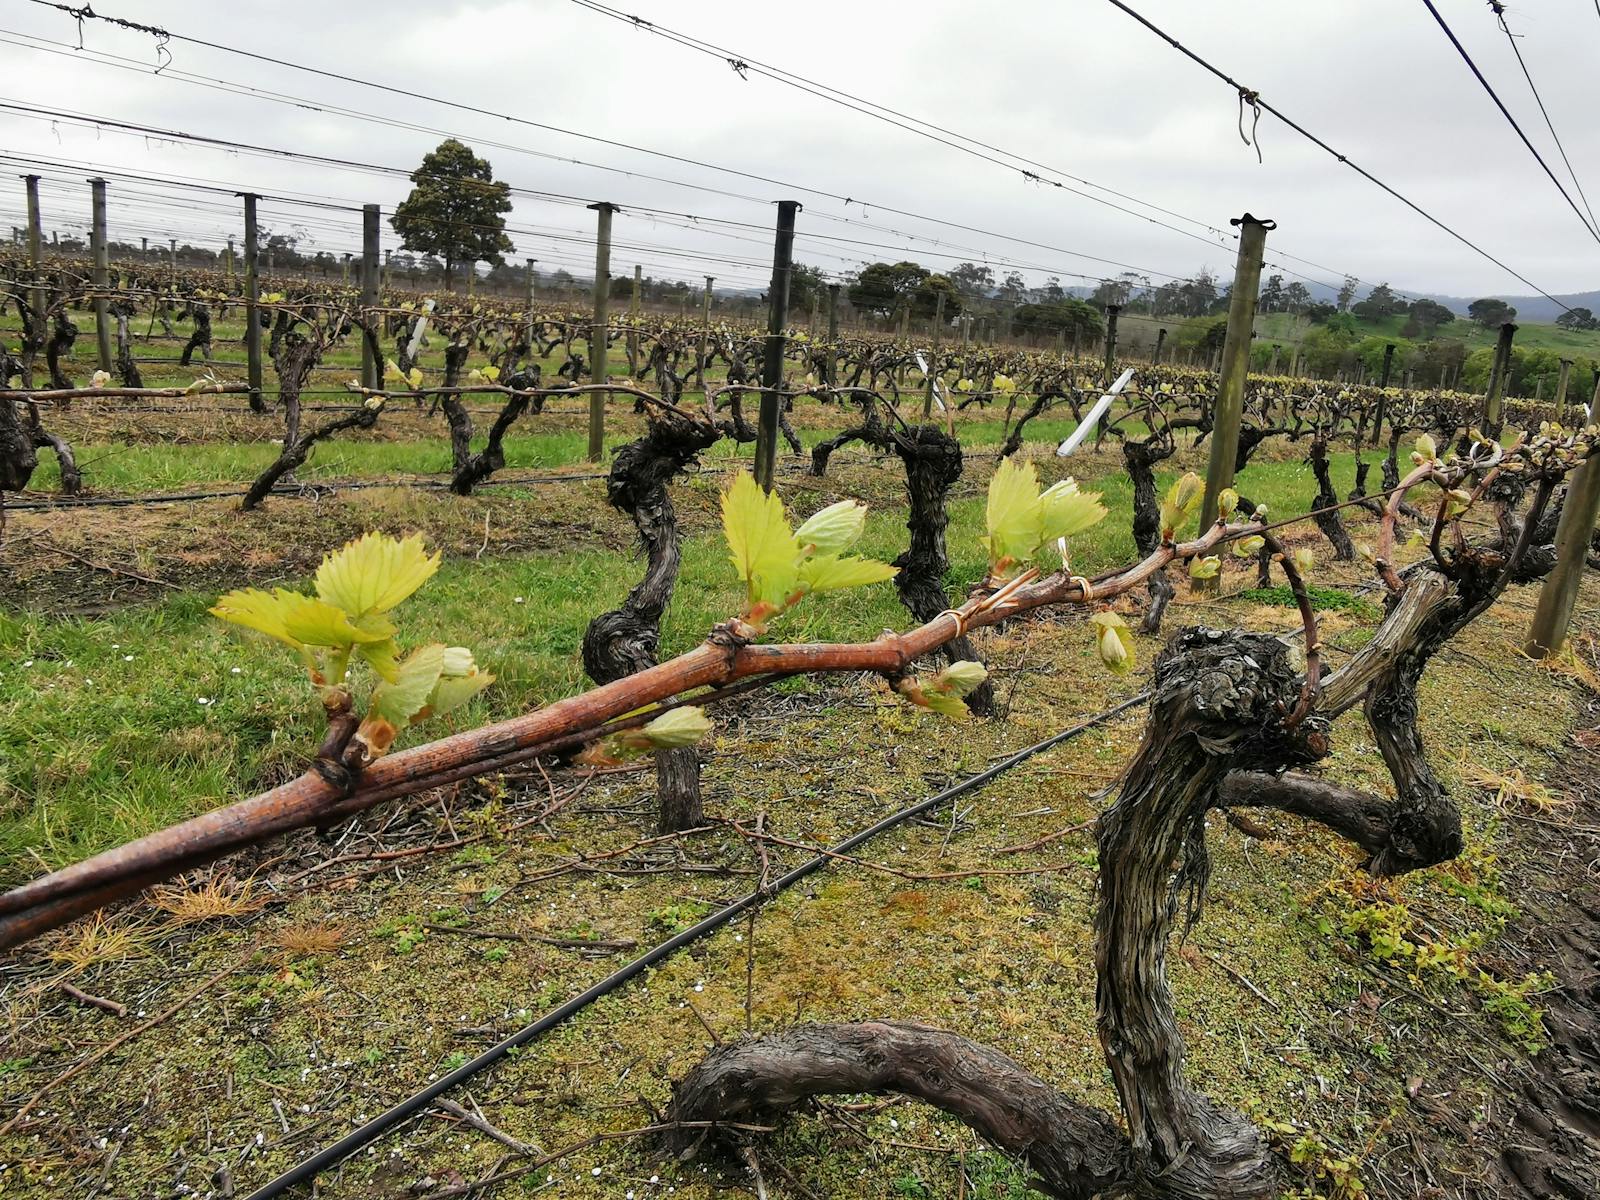 The image shows the first shoots on grapevines, with a cloudy sky behind.